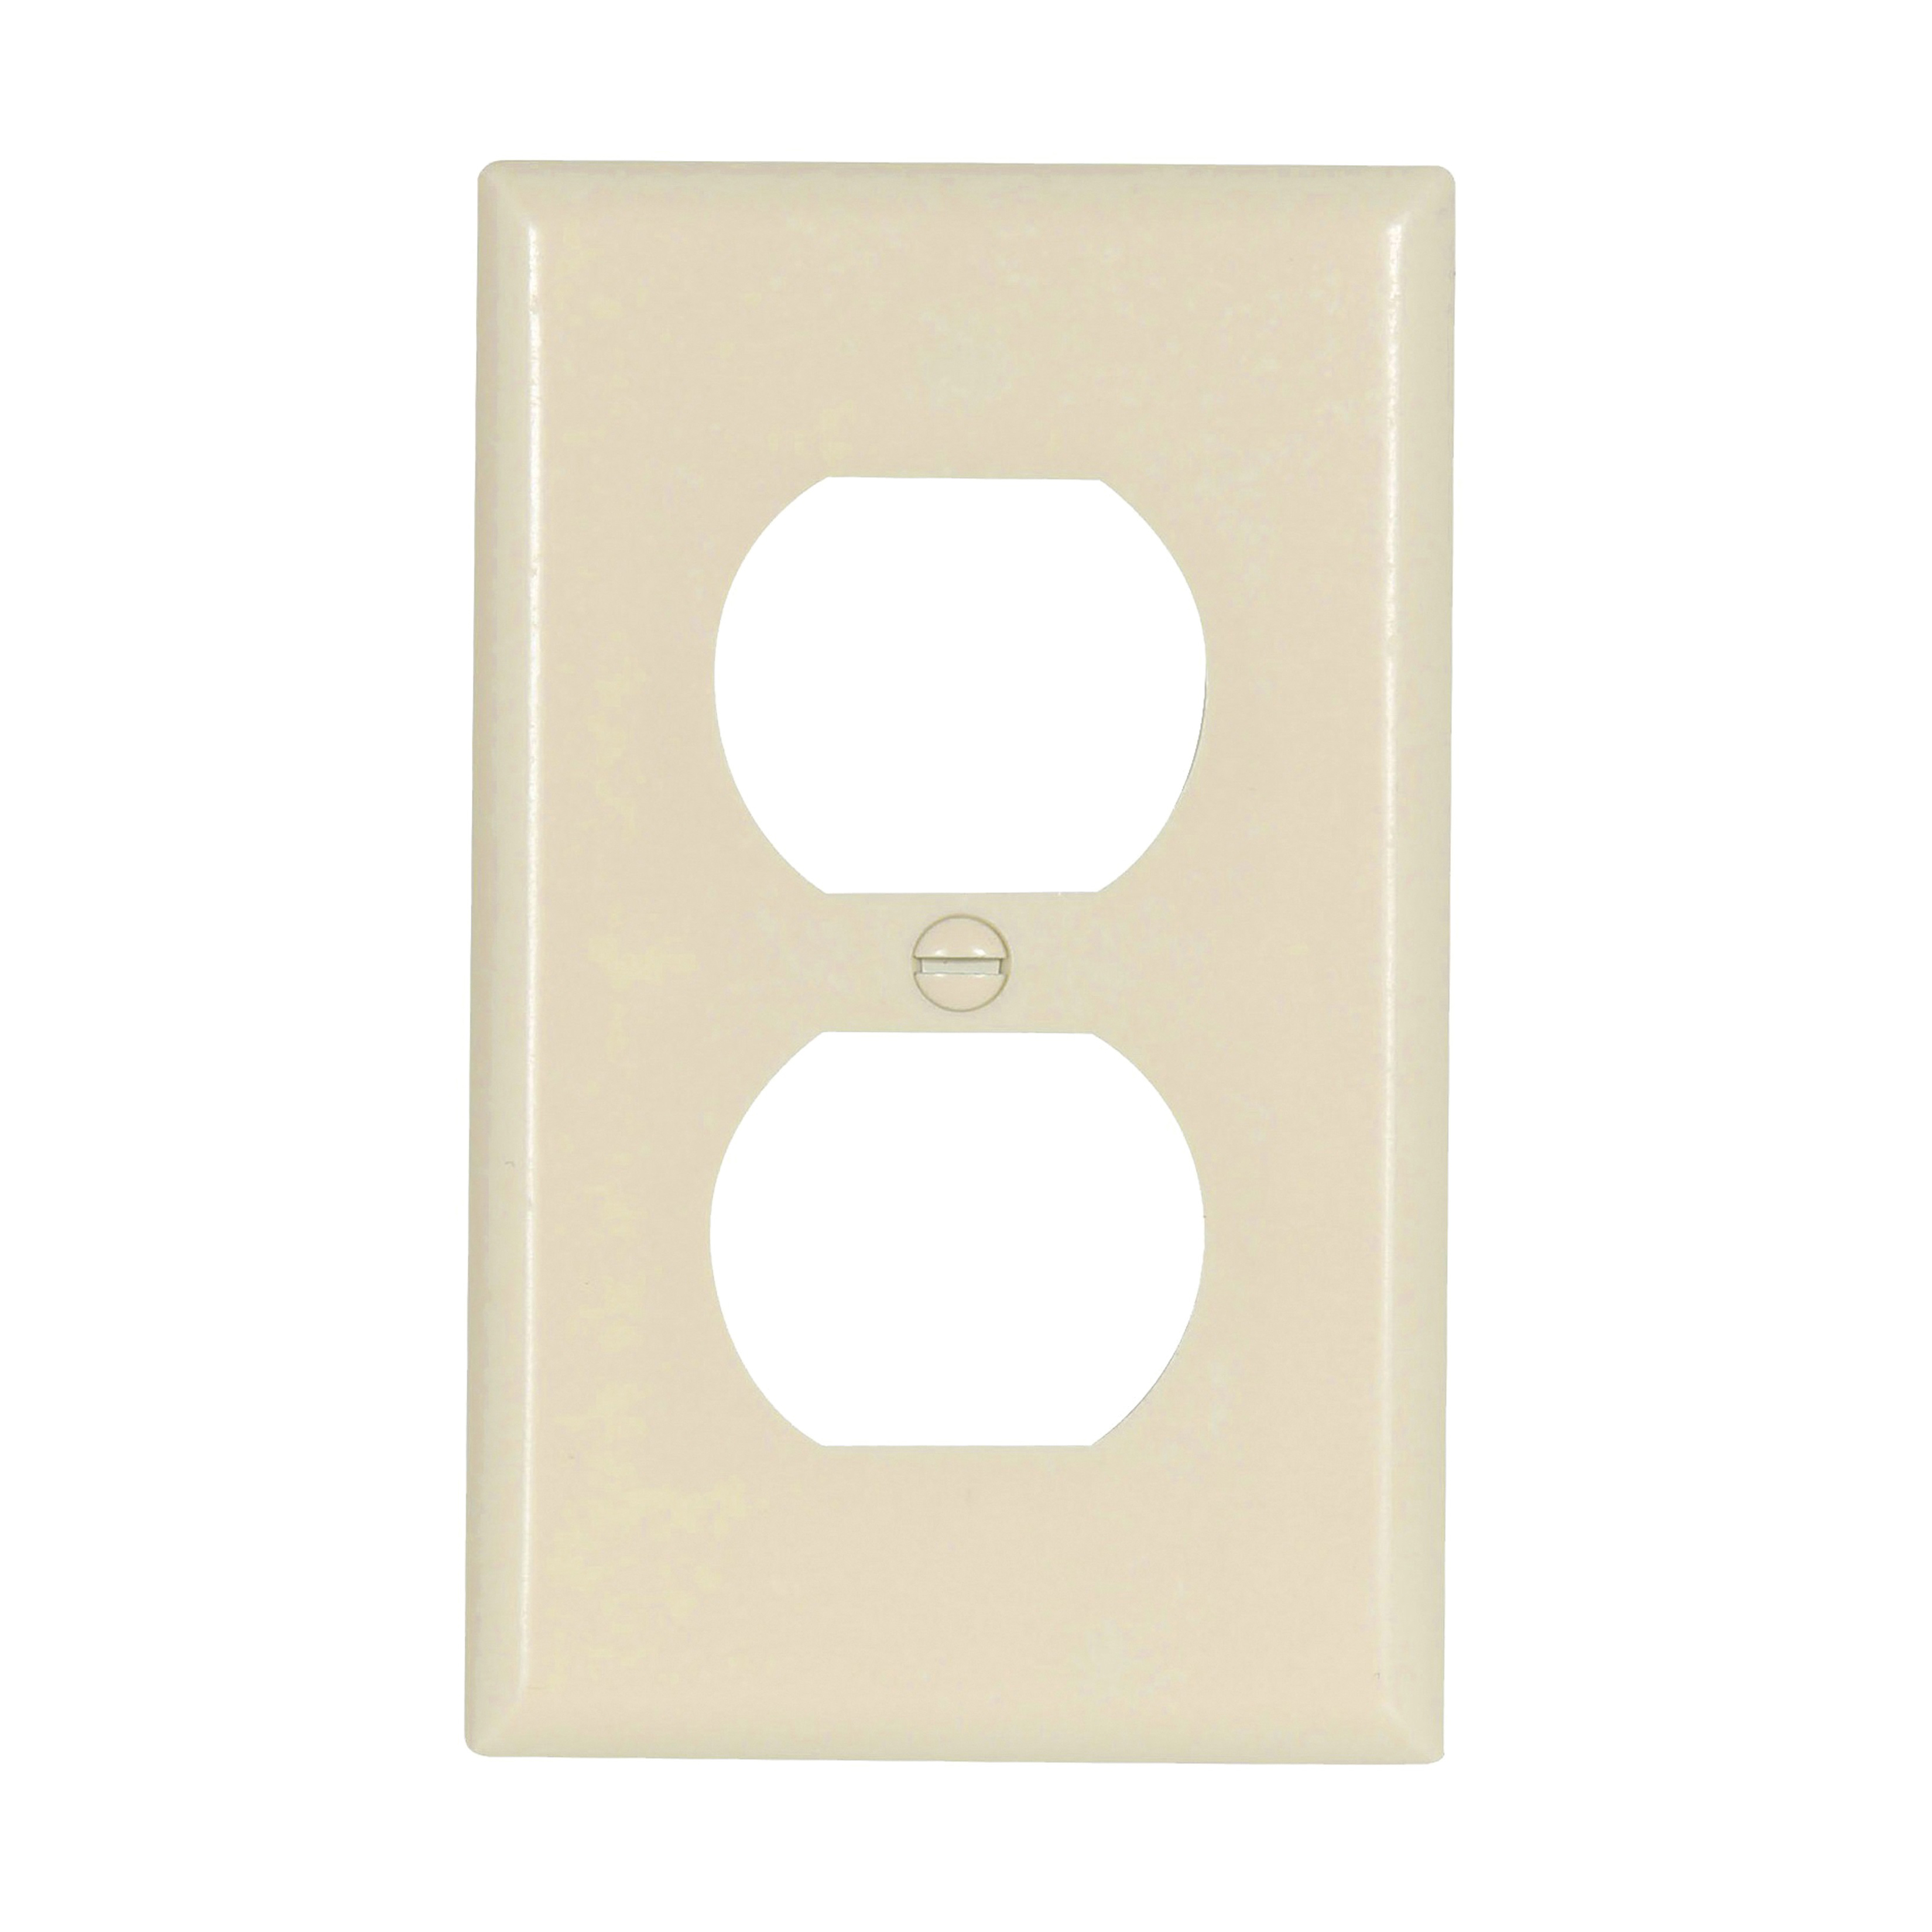 2132LA-BOX Receptacle Wallplate, 4-1/2 in L, 2-3/4 in W, 1 -Gang, Thermoset, Light Almond